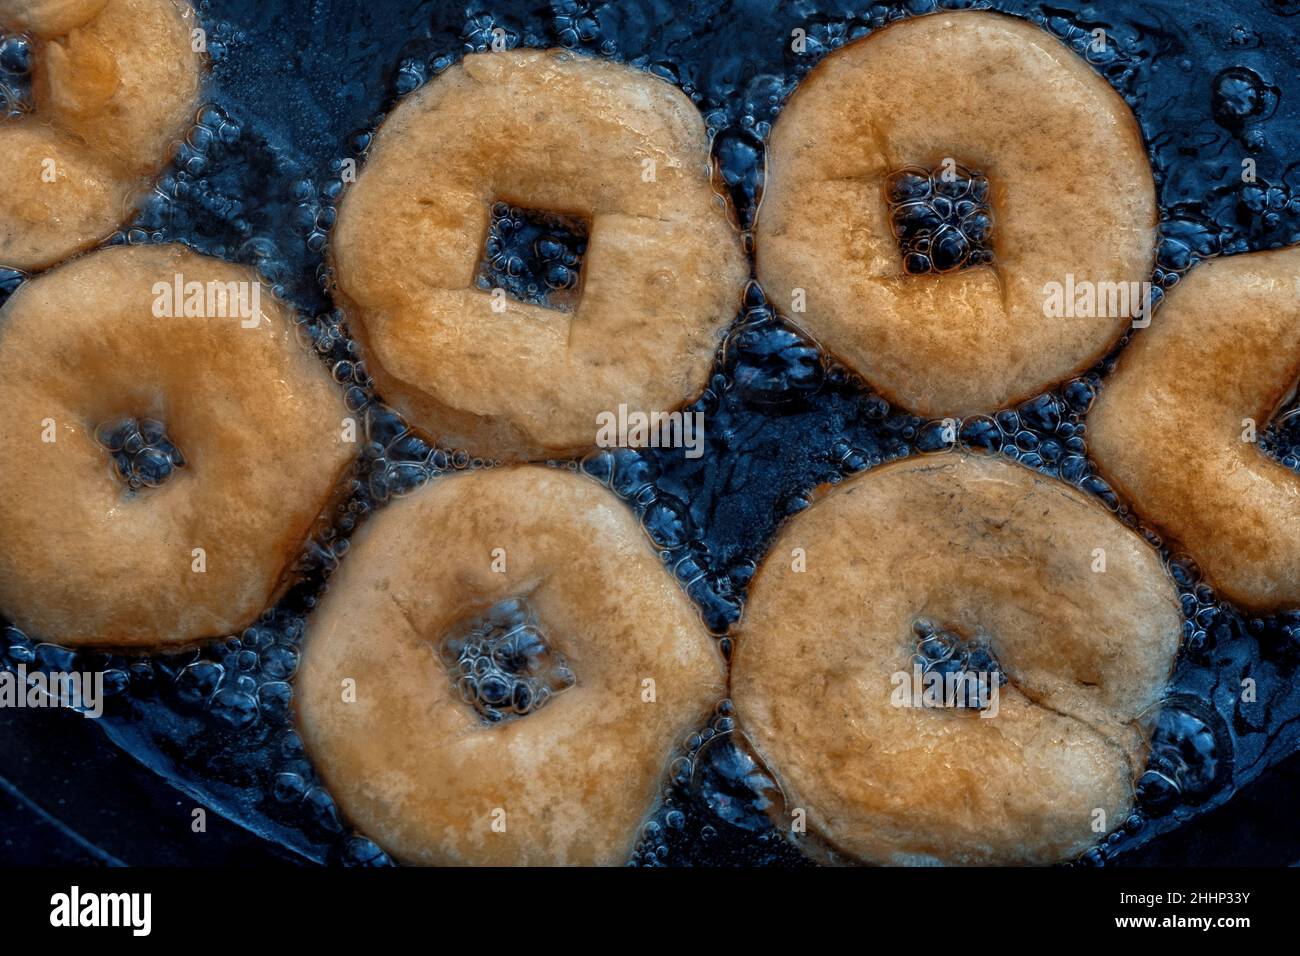 Homemade donuts frying in cast iron skillet outdoors. Stock Photo